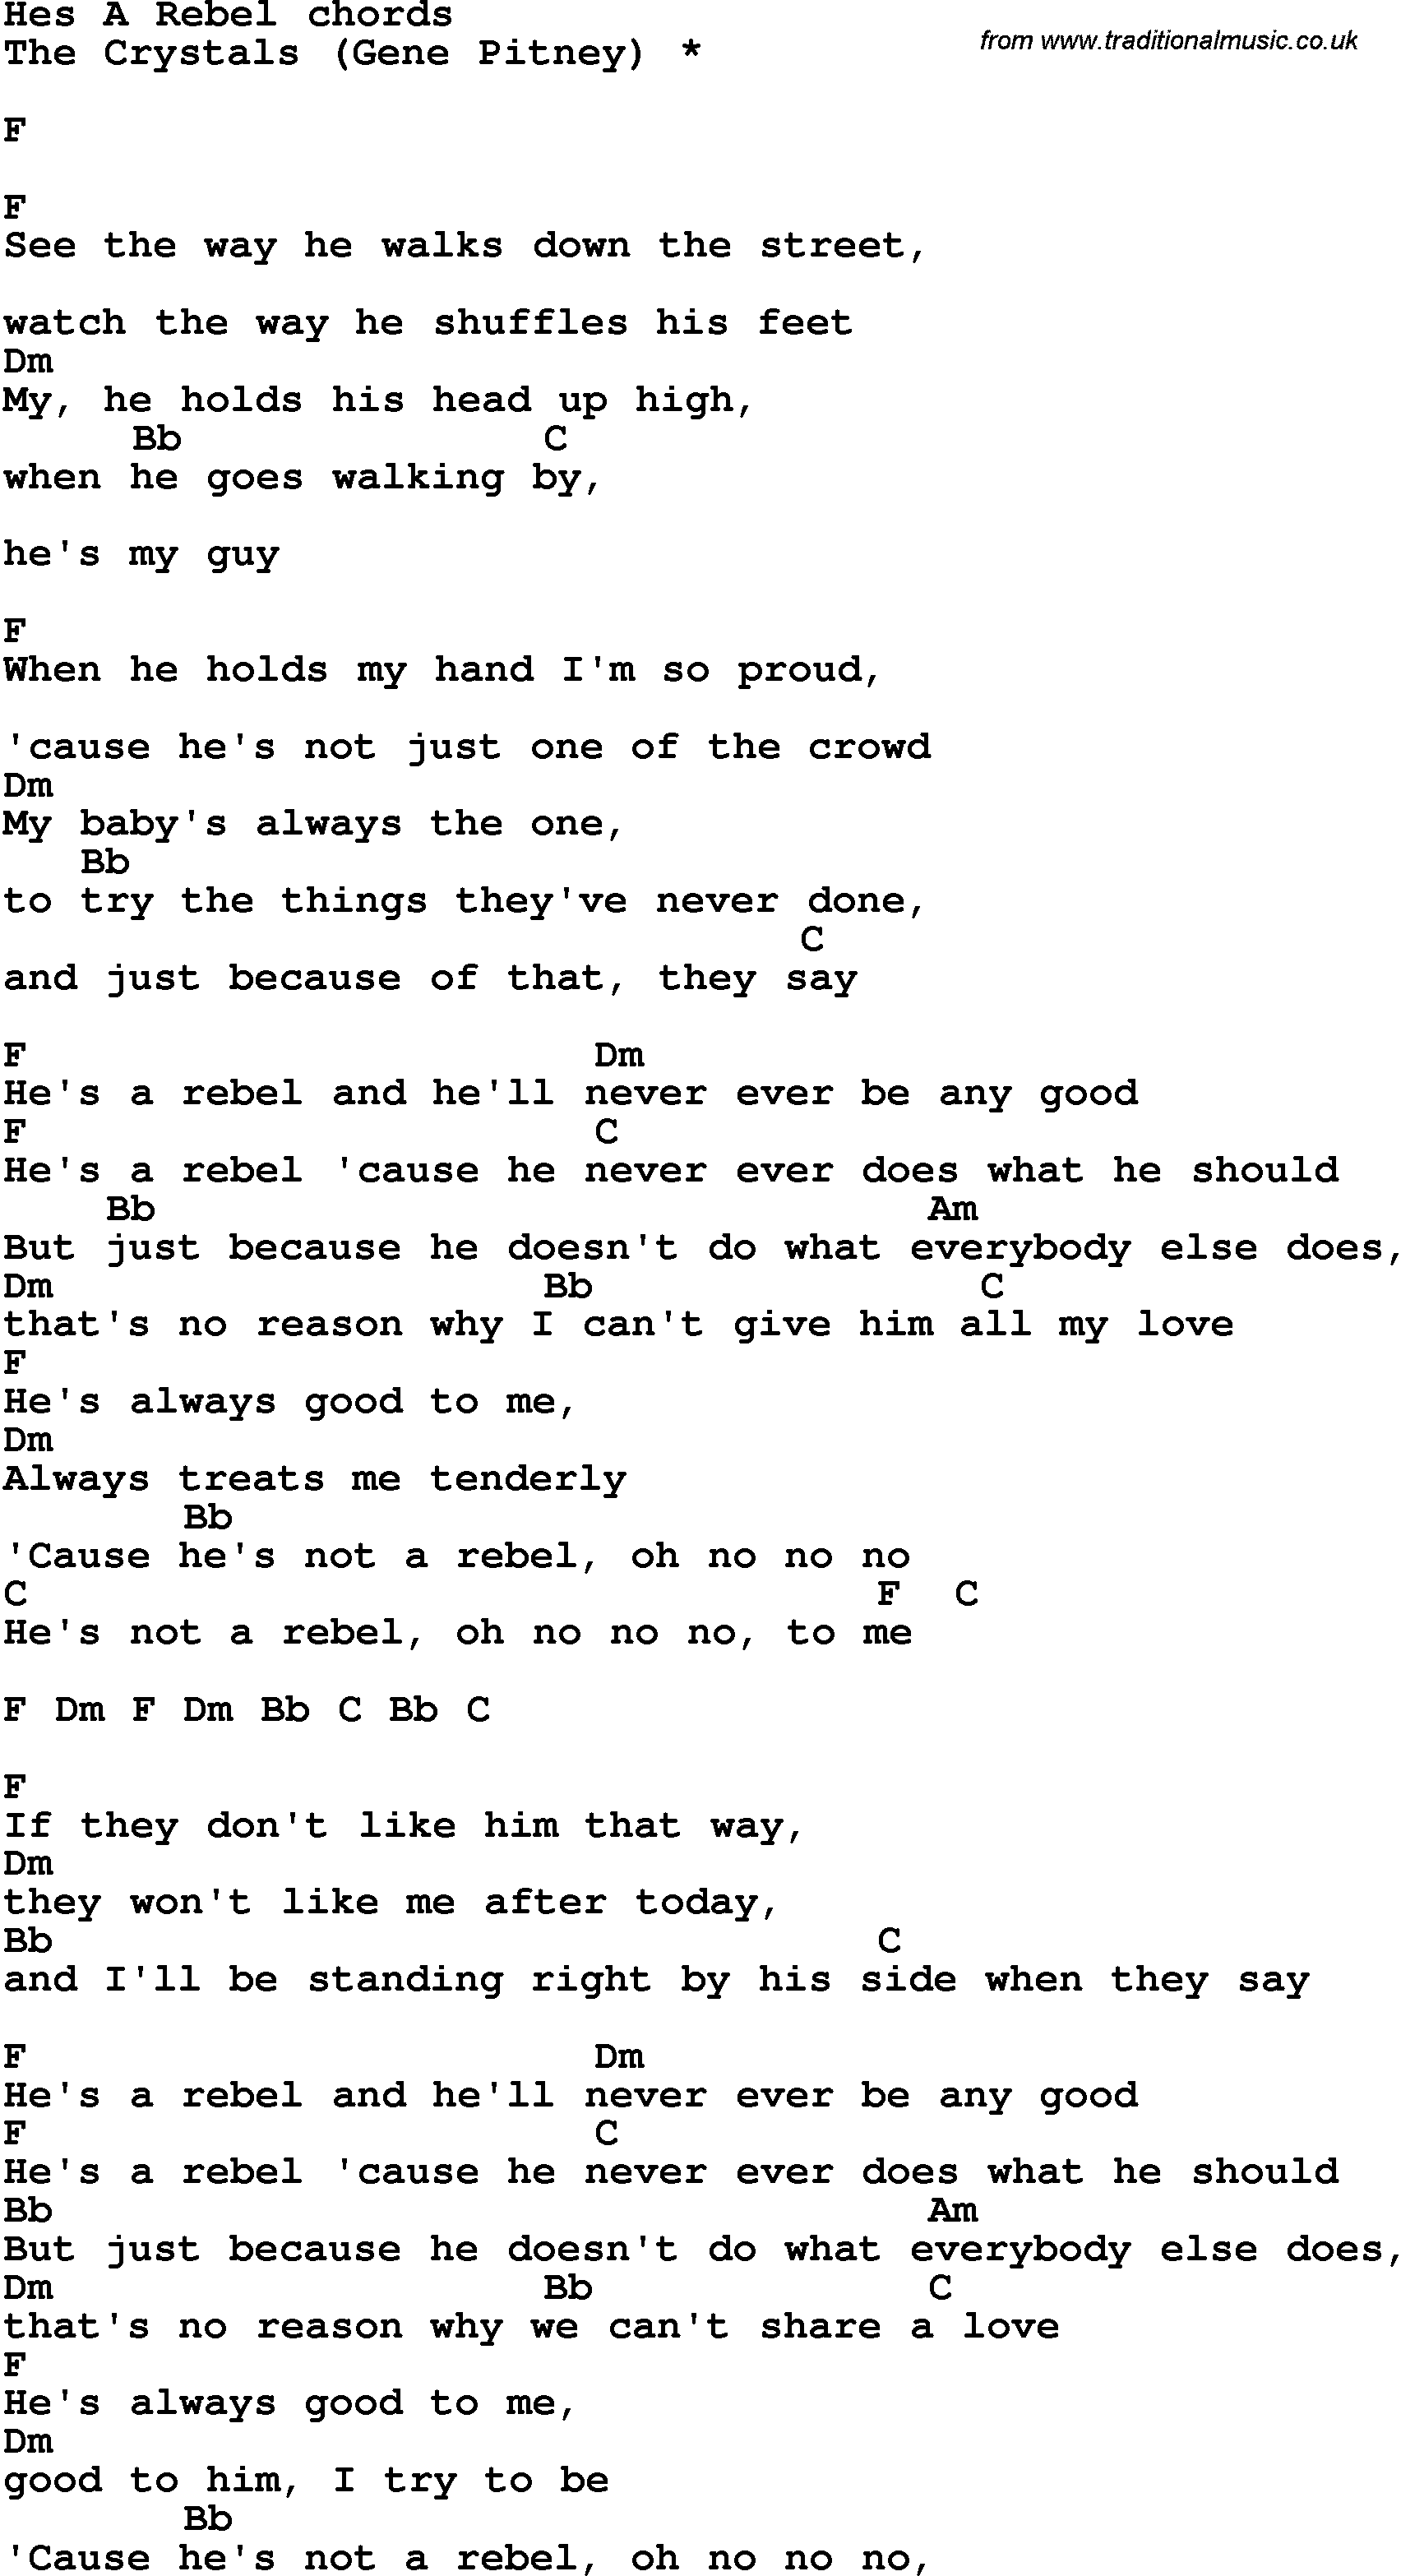 Song Lyrics with guitar chords for He's A Rebel